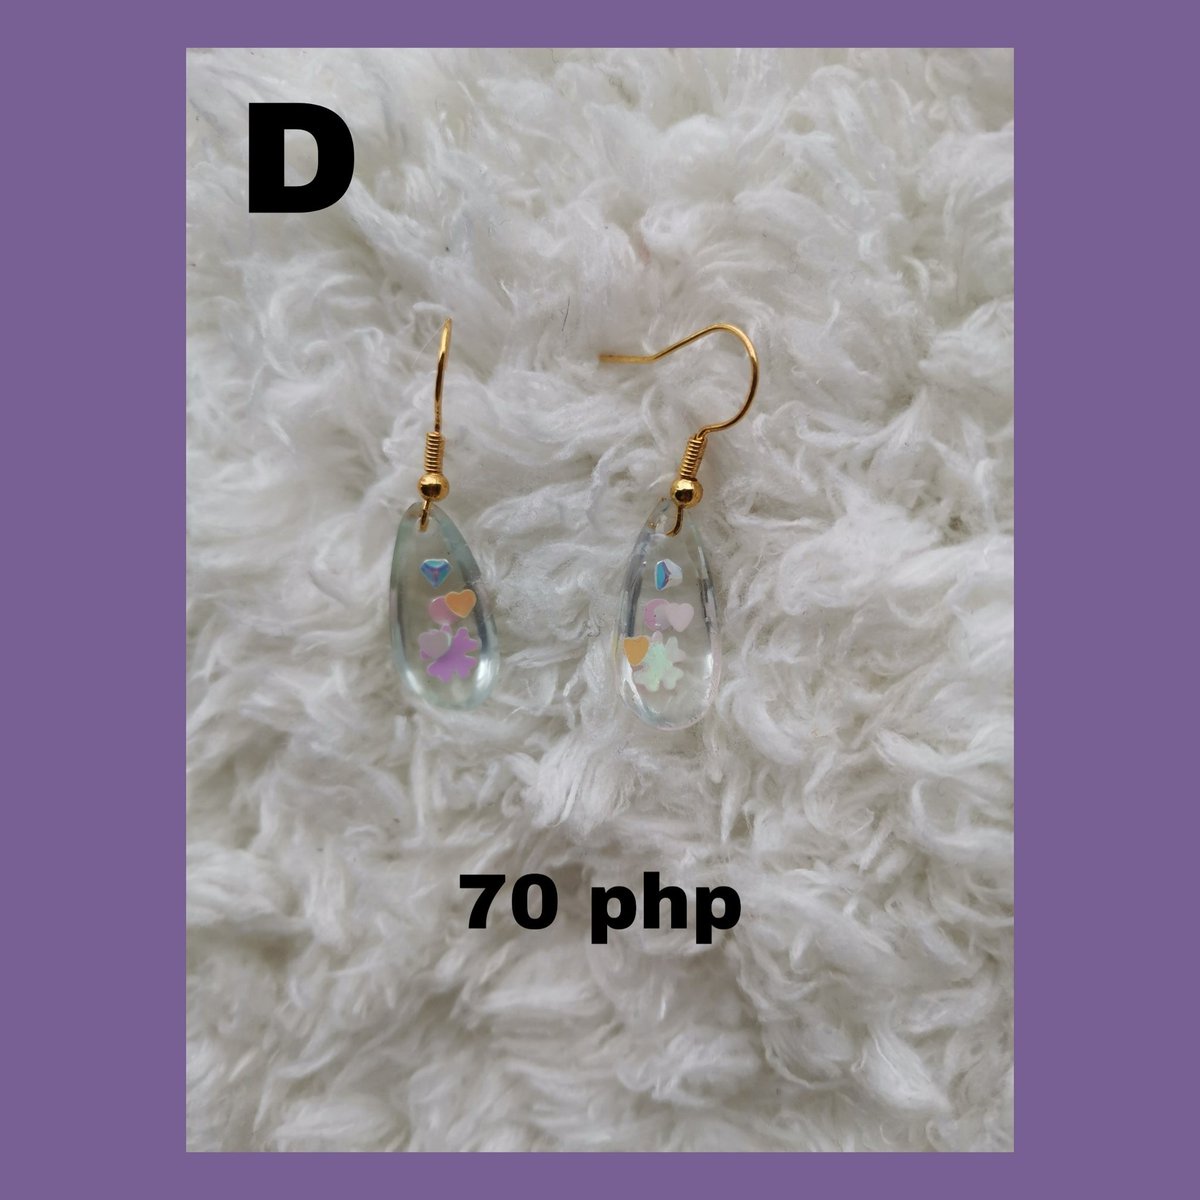 Earrings:- You can request your fave color but still depends if I have it available.- I can take on commissions too so pls feel free to dm so I can check. 